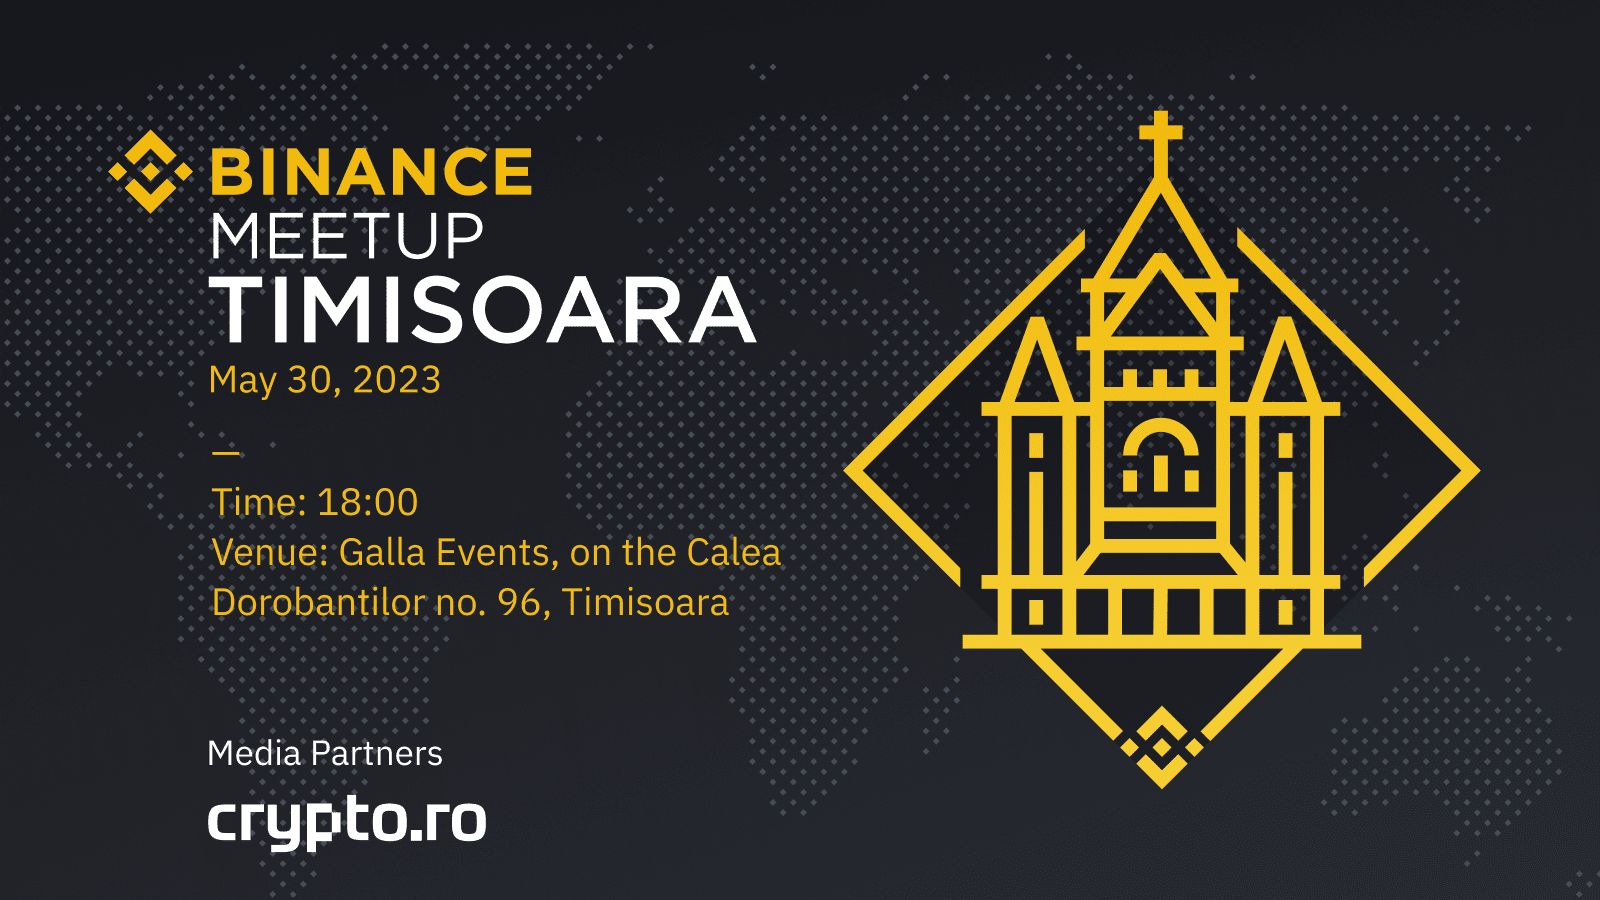 Crypto.ro and Binance Current the third Binance Meetup in Romania, Taking place in Timisoara